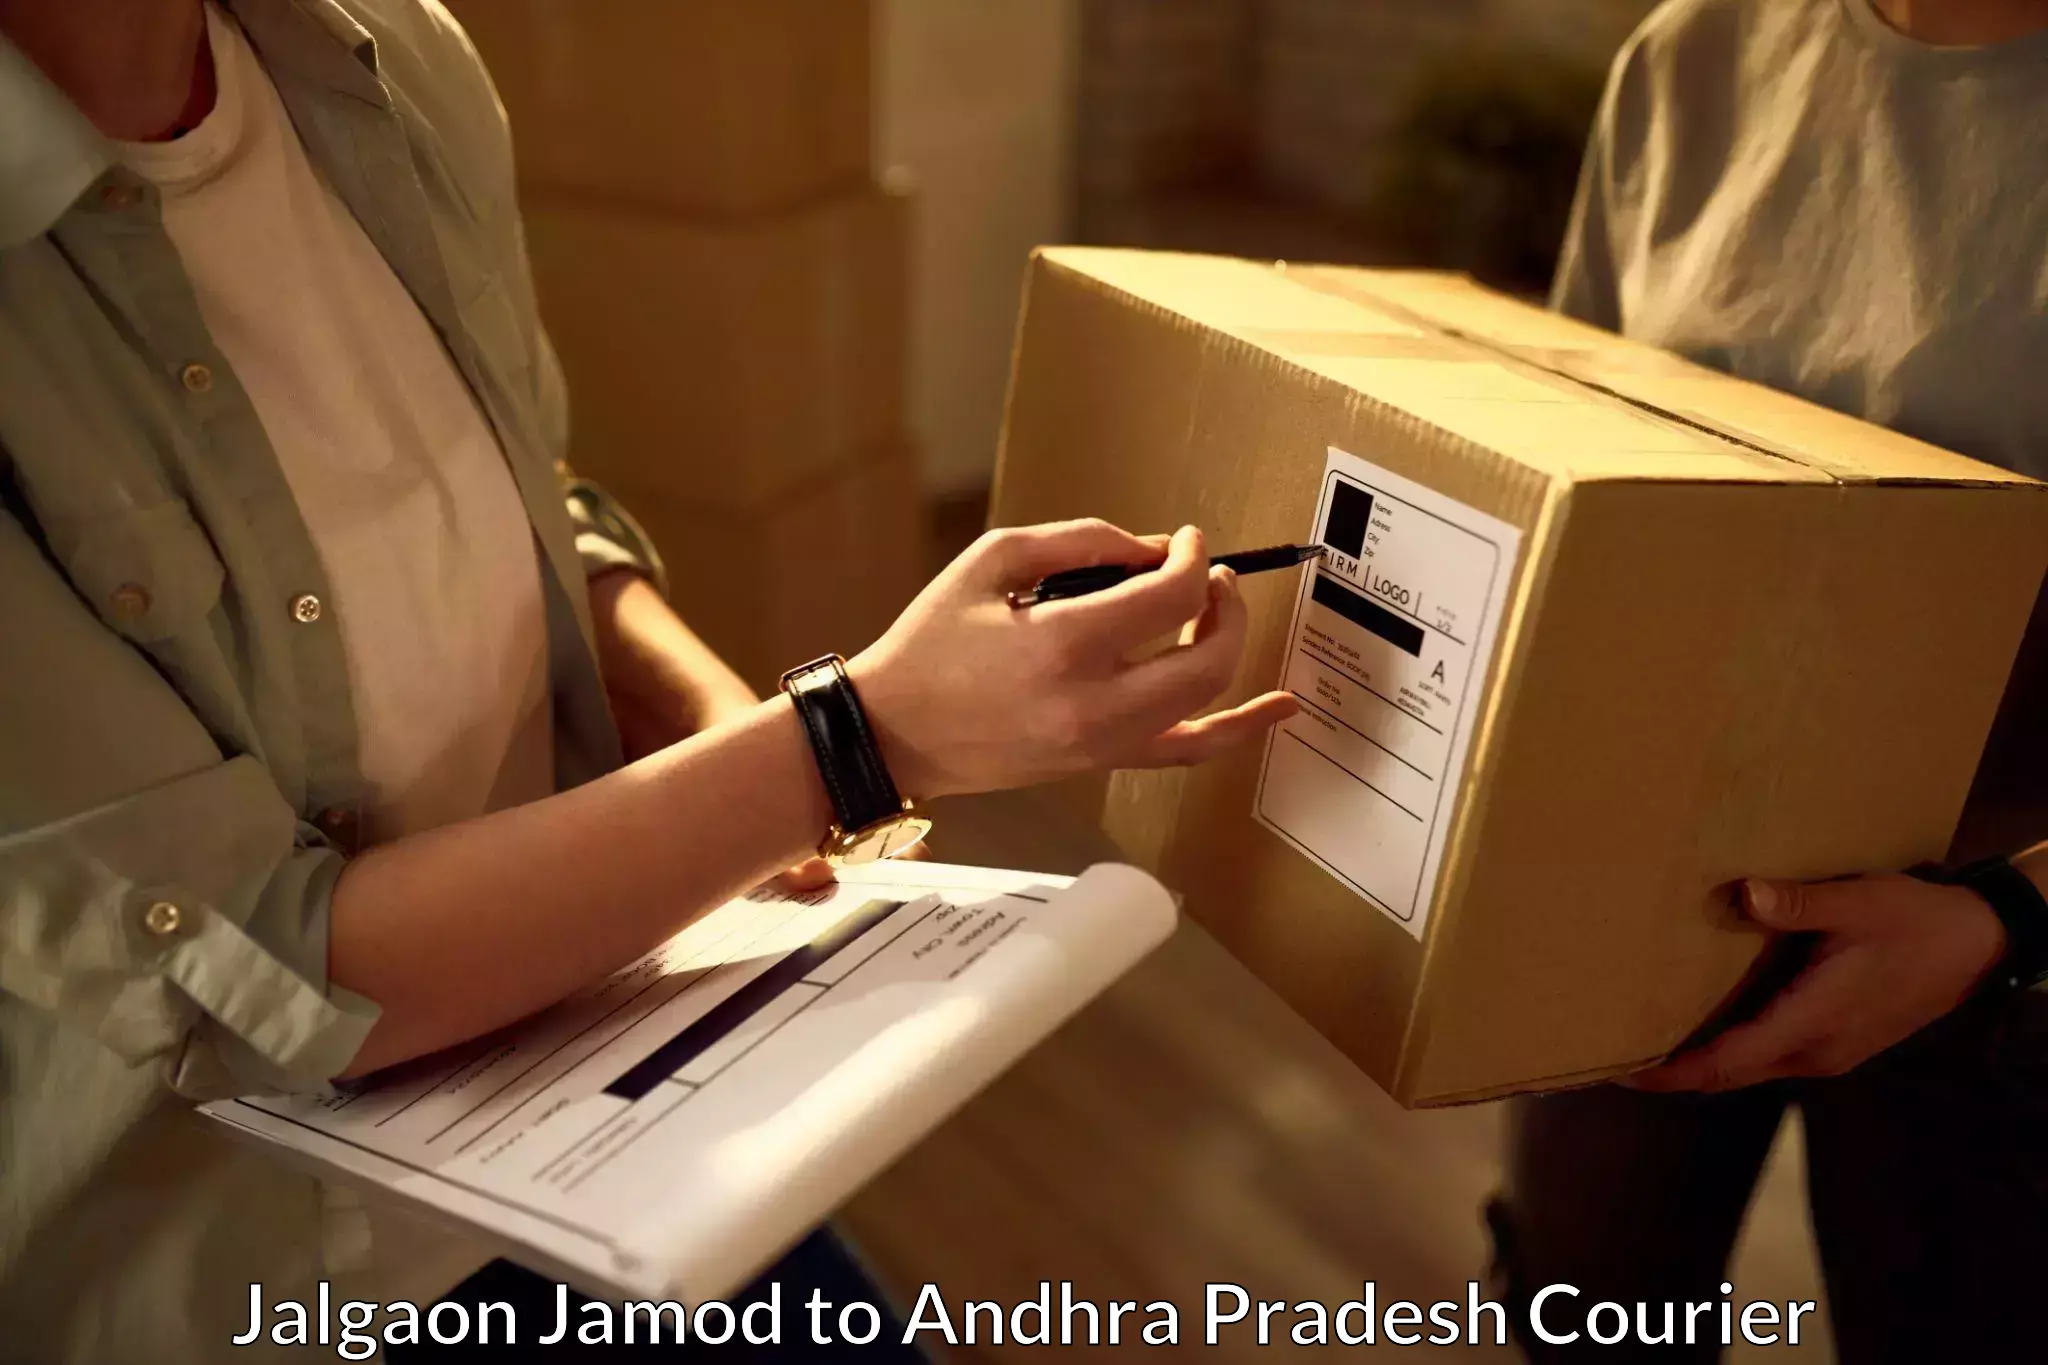 Cost-effective courier solutions Jalgaon Jamod to Visakhapatnam Port